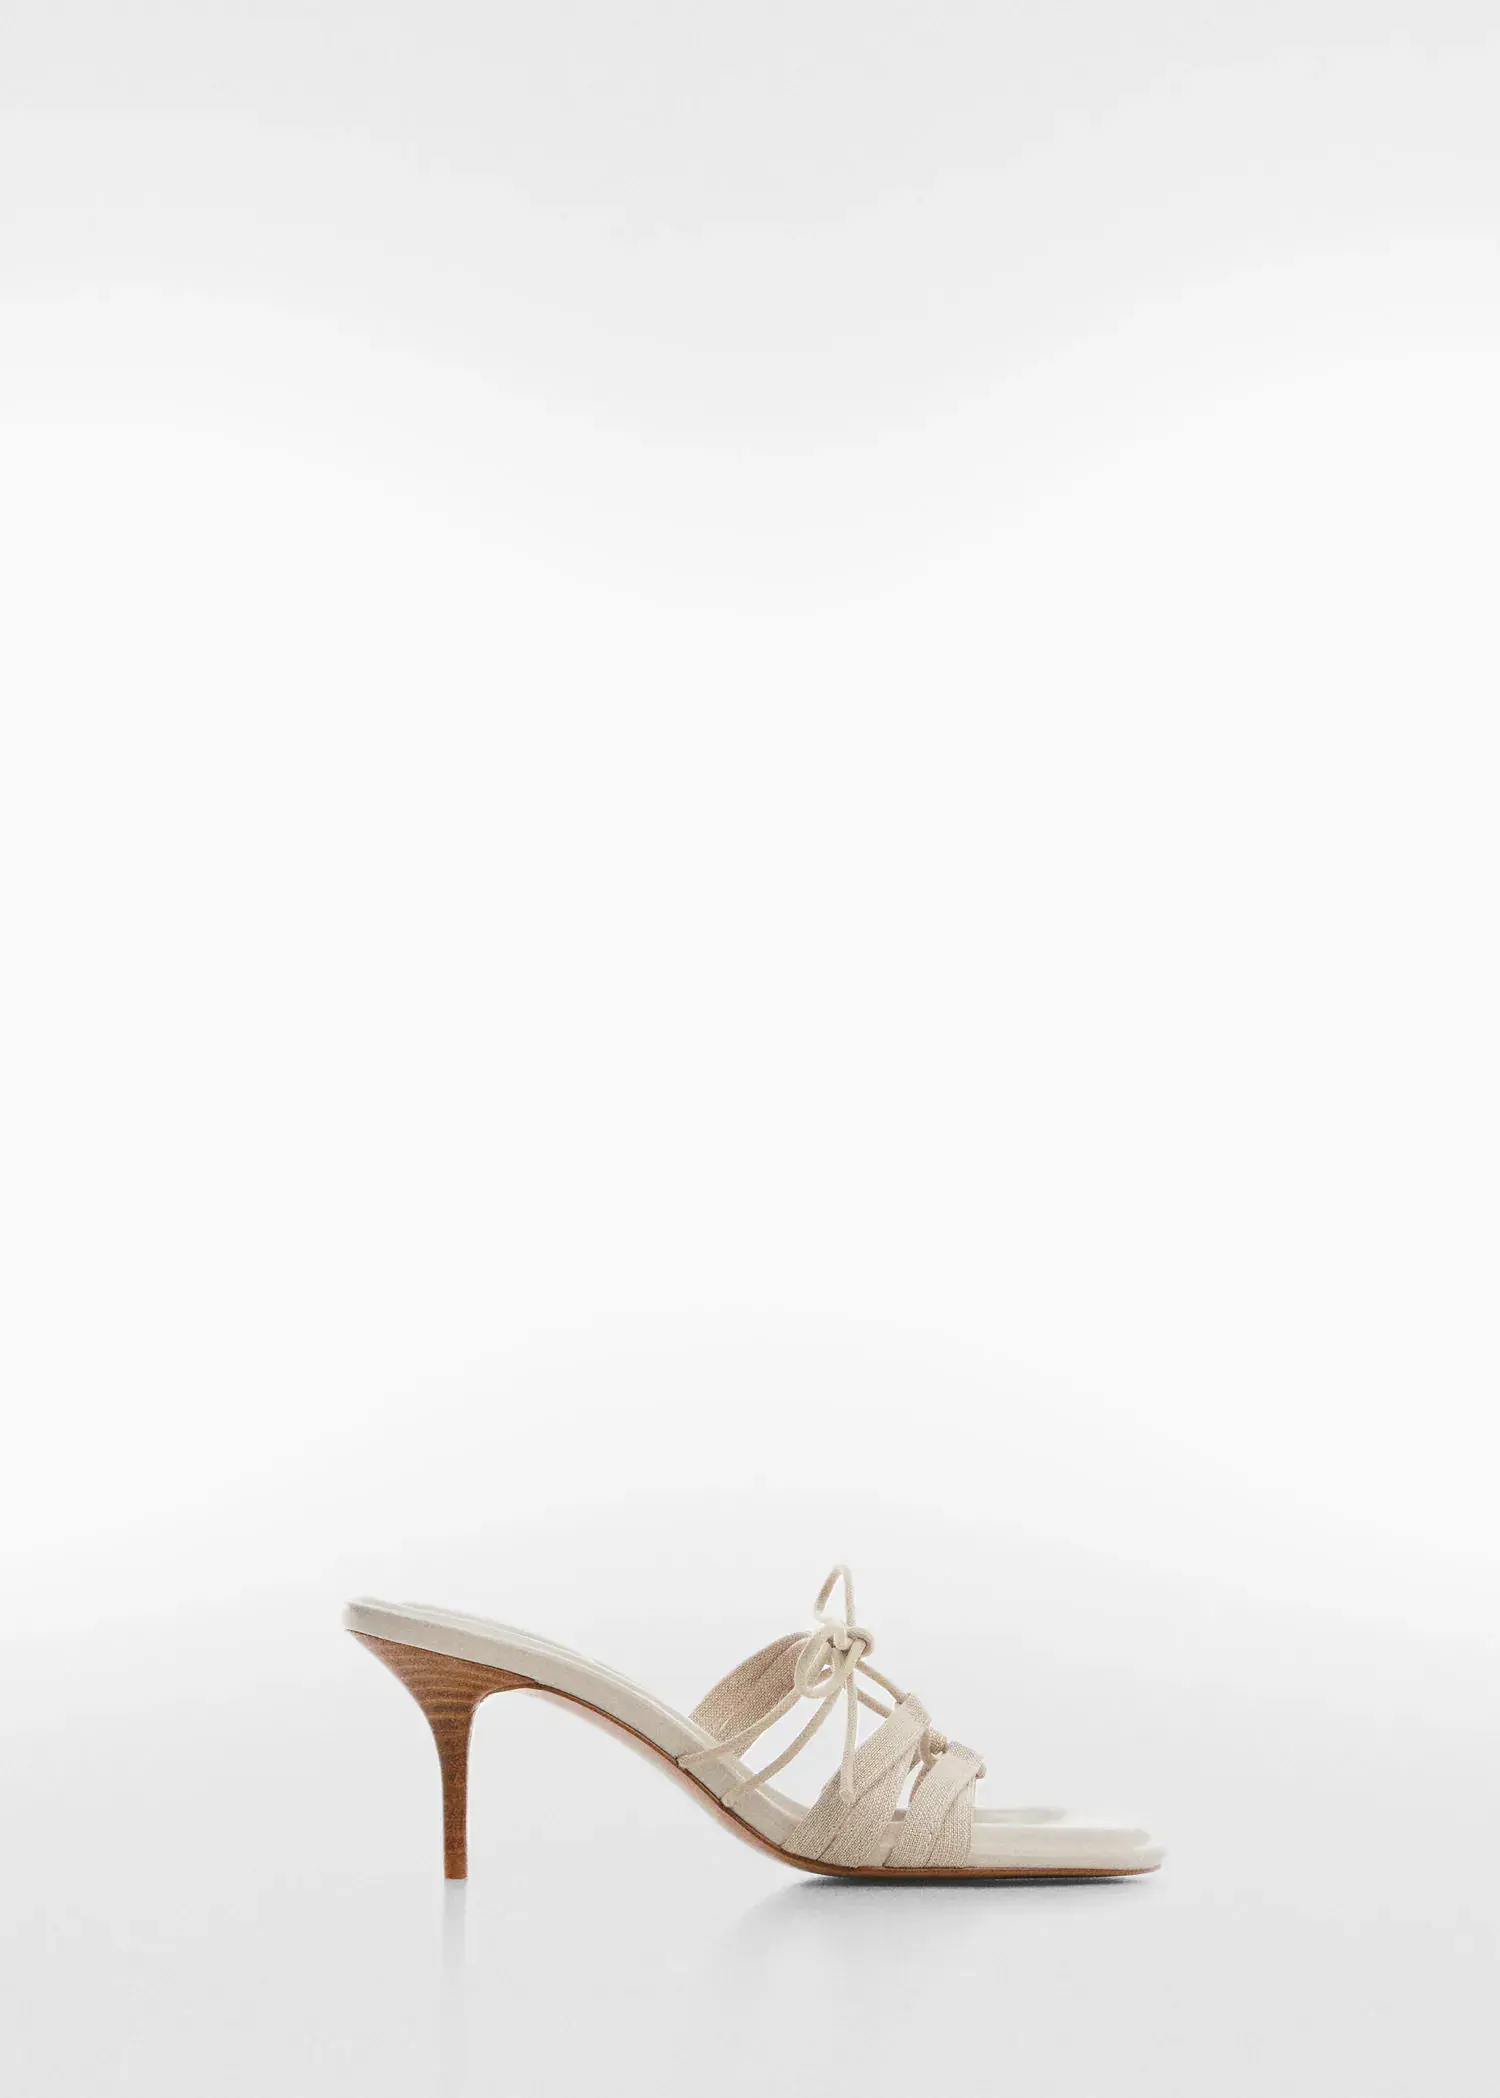 Mango Bow heel sandals. a pair of white high heeled shoes on a white background 